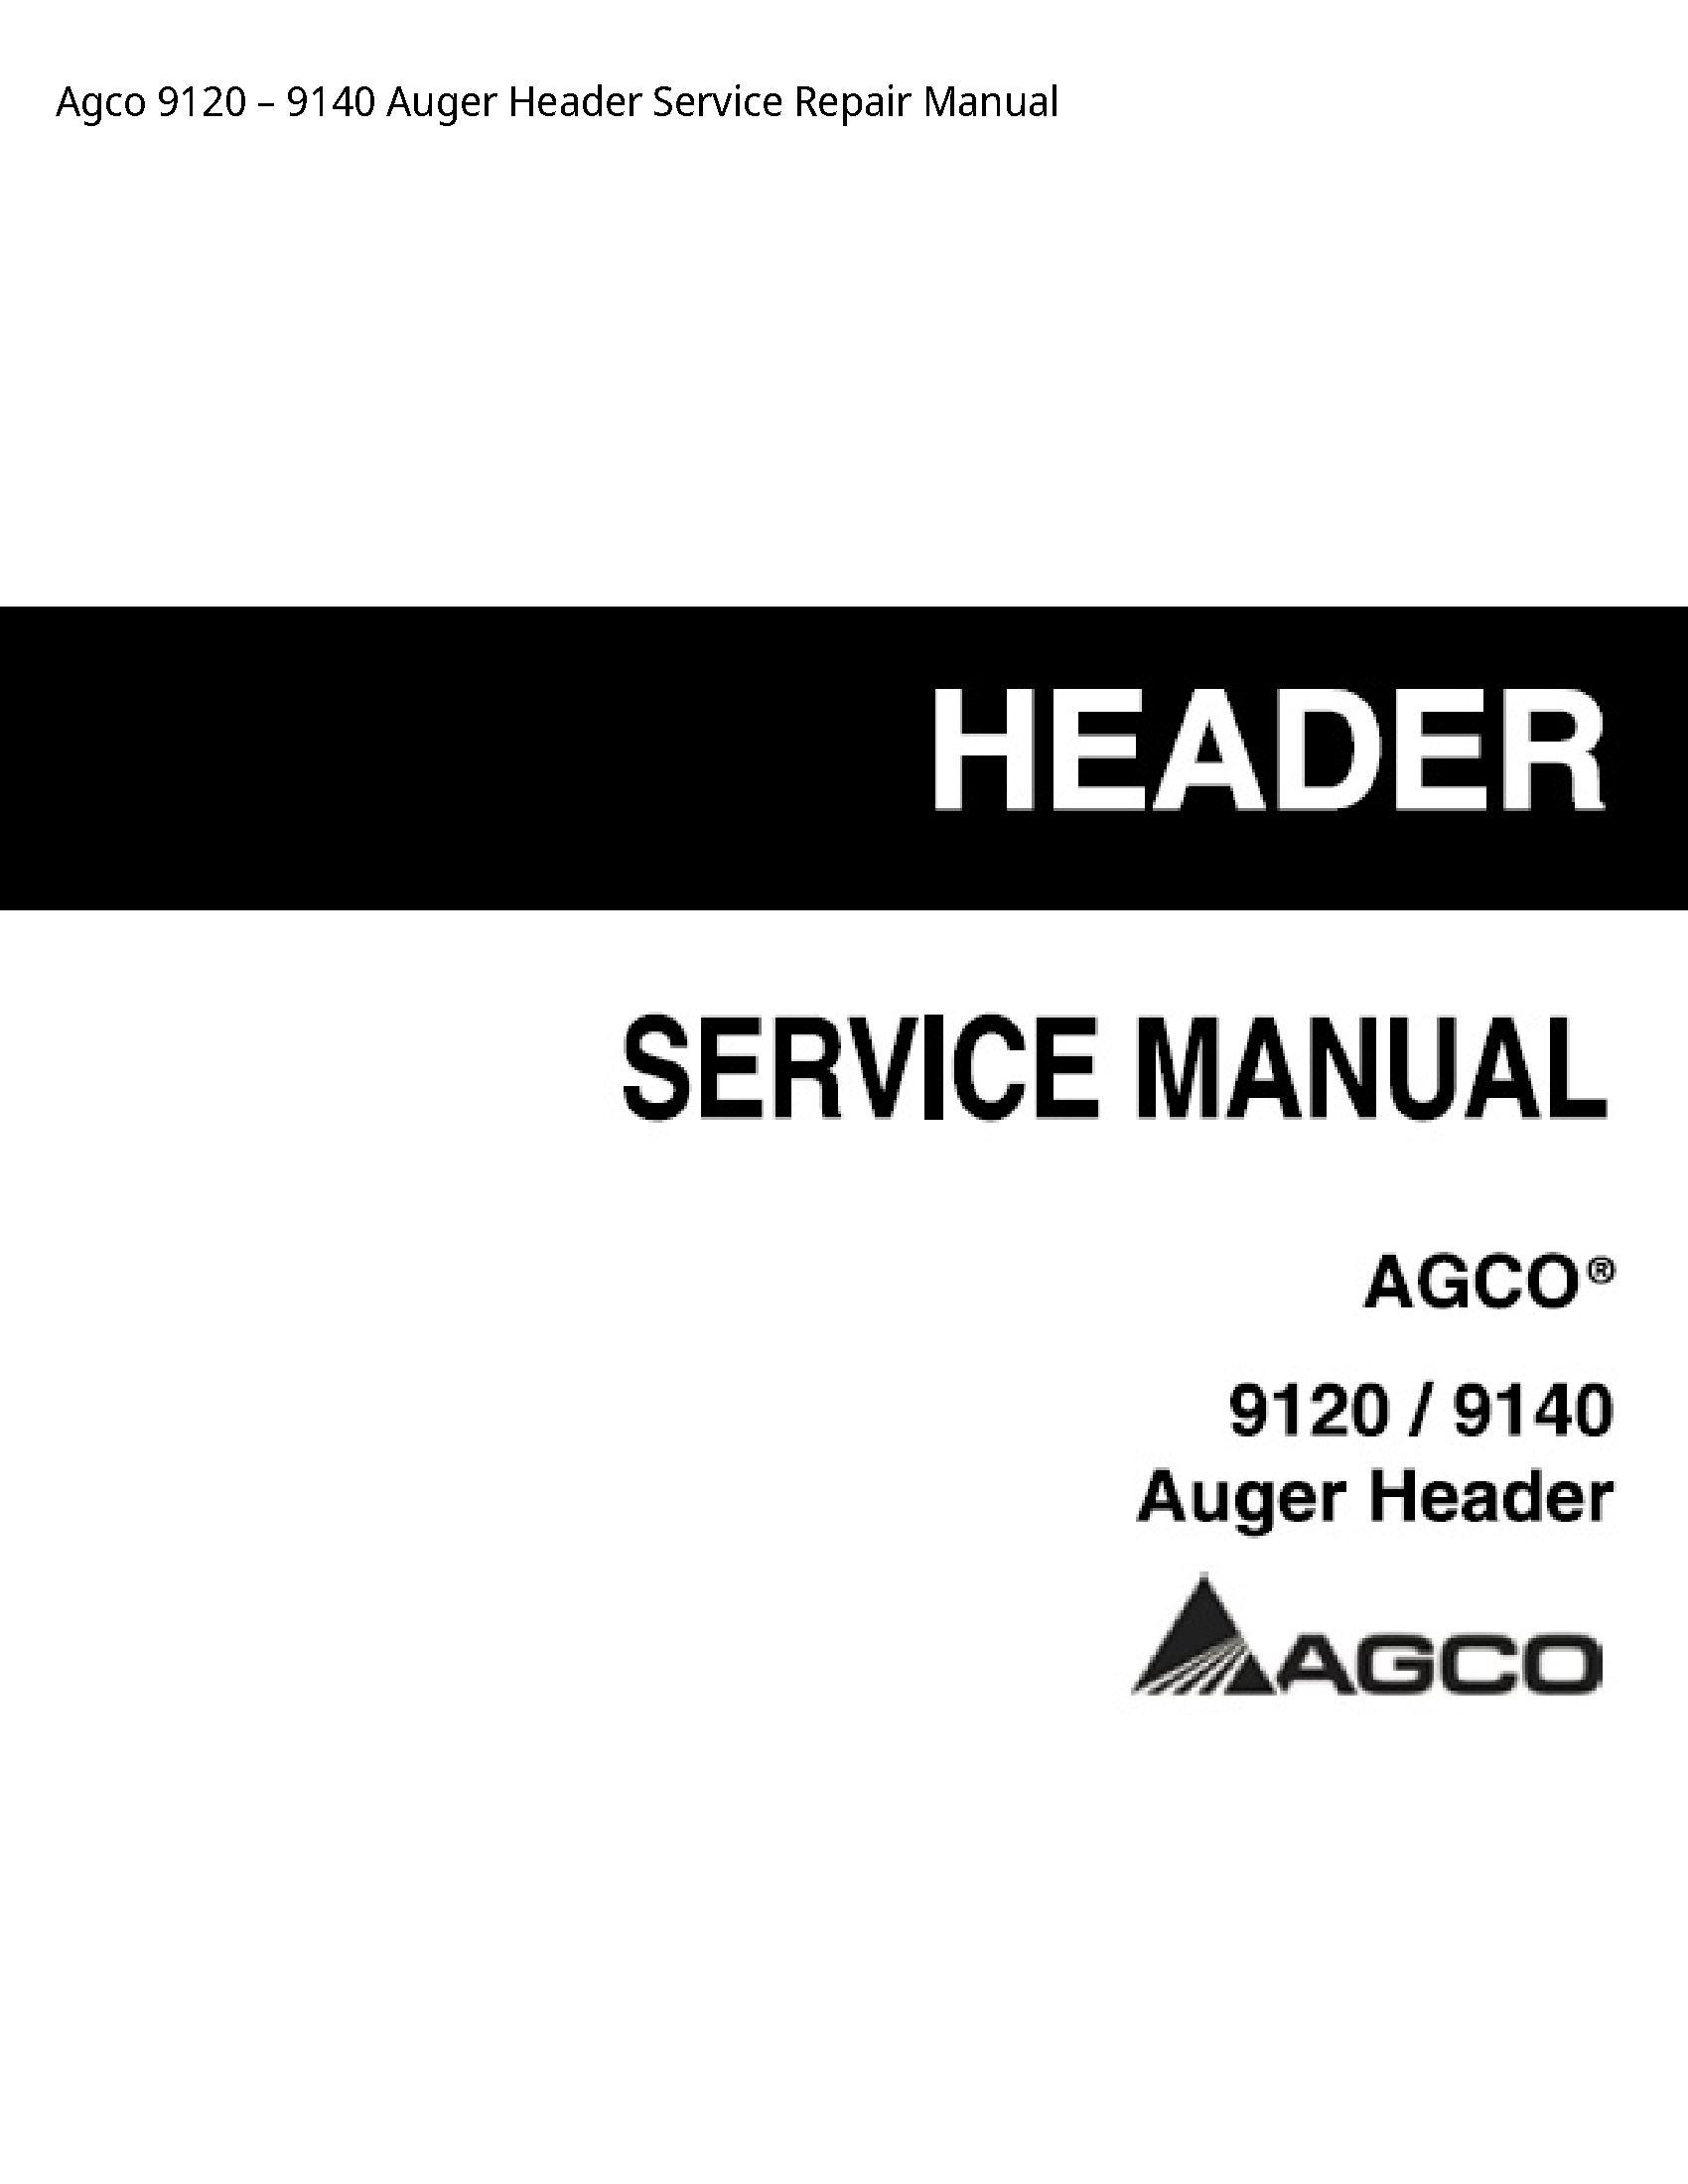 AGCO 9120 Auger Header manual